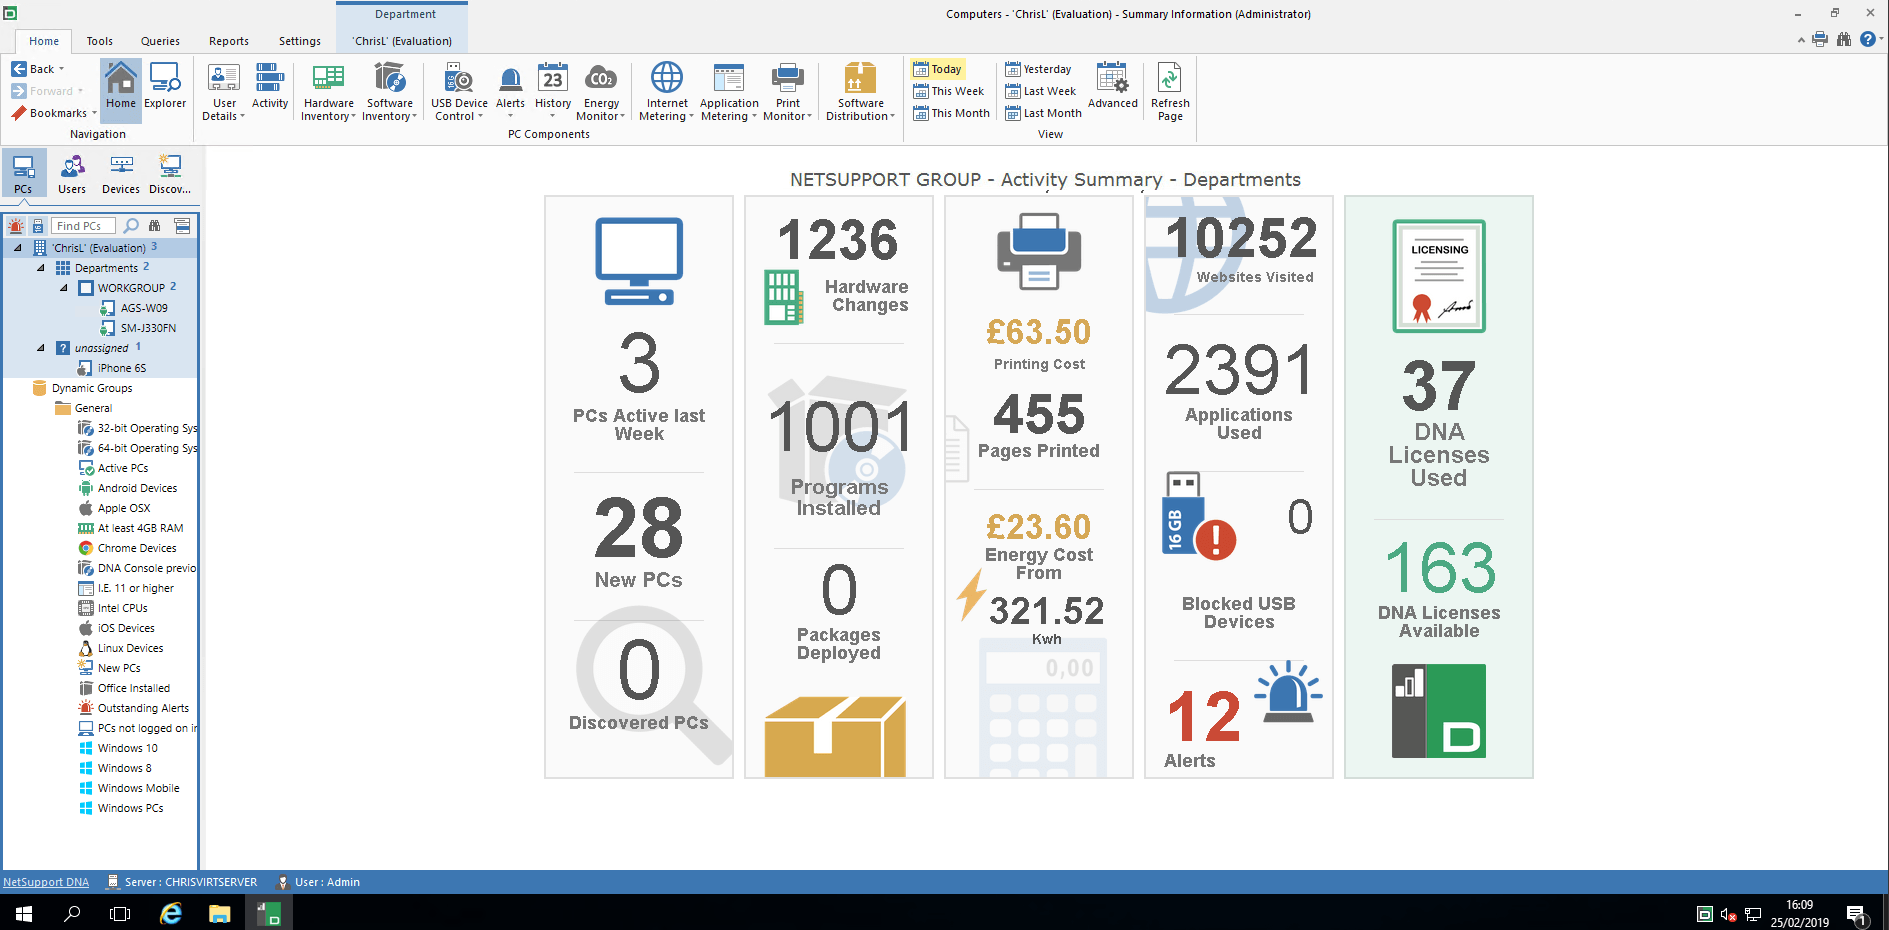 NetSupport DNA Dashboard - Intuitive welcome screen with key stats for the organization.